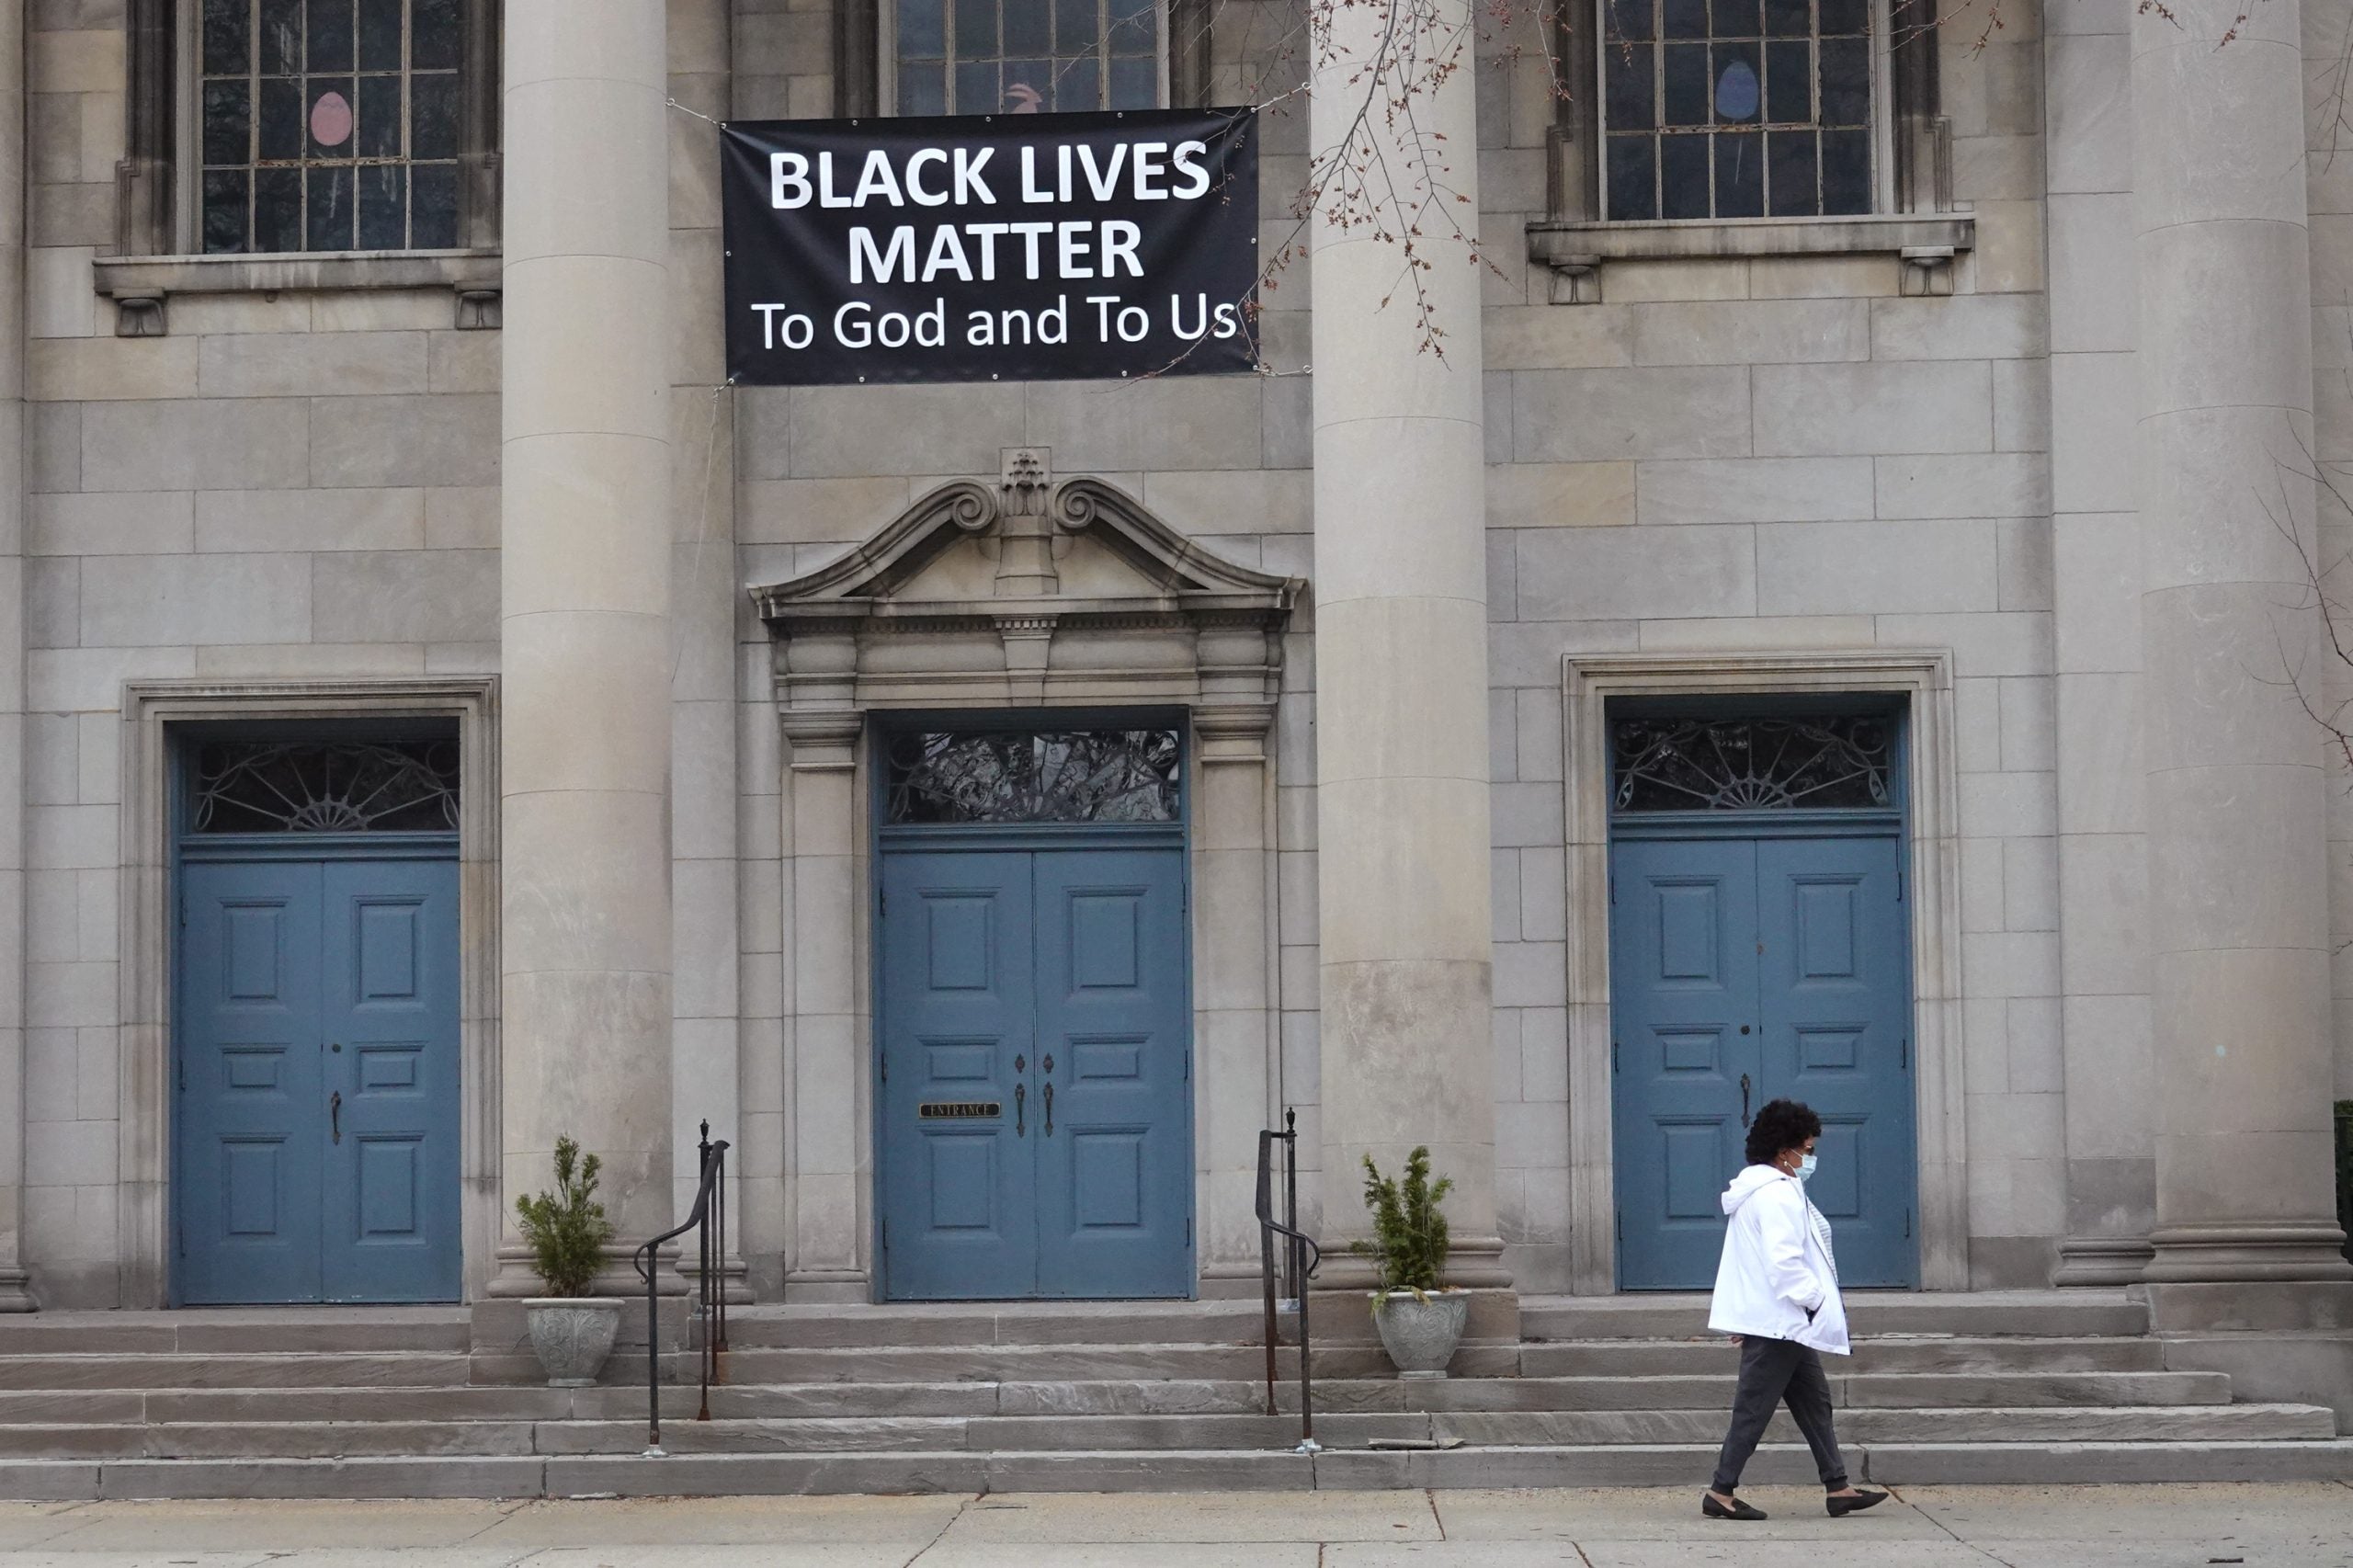 16 Churches And Evanston Mayor Continue Reparations Effort